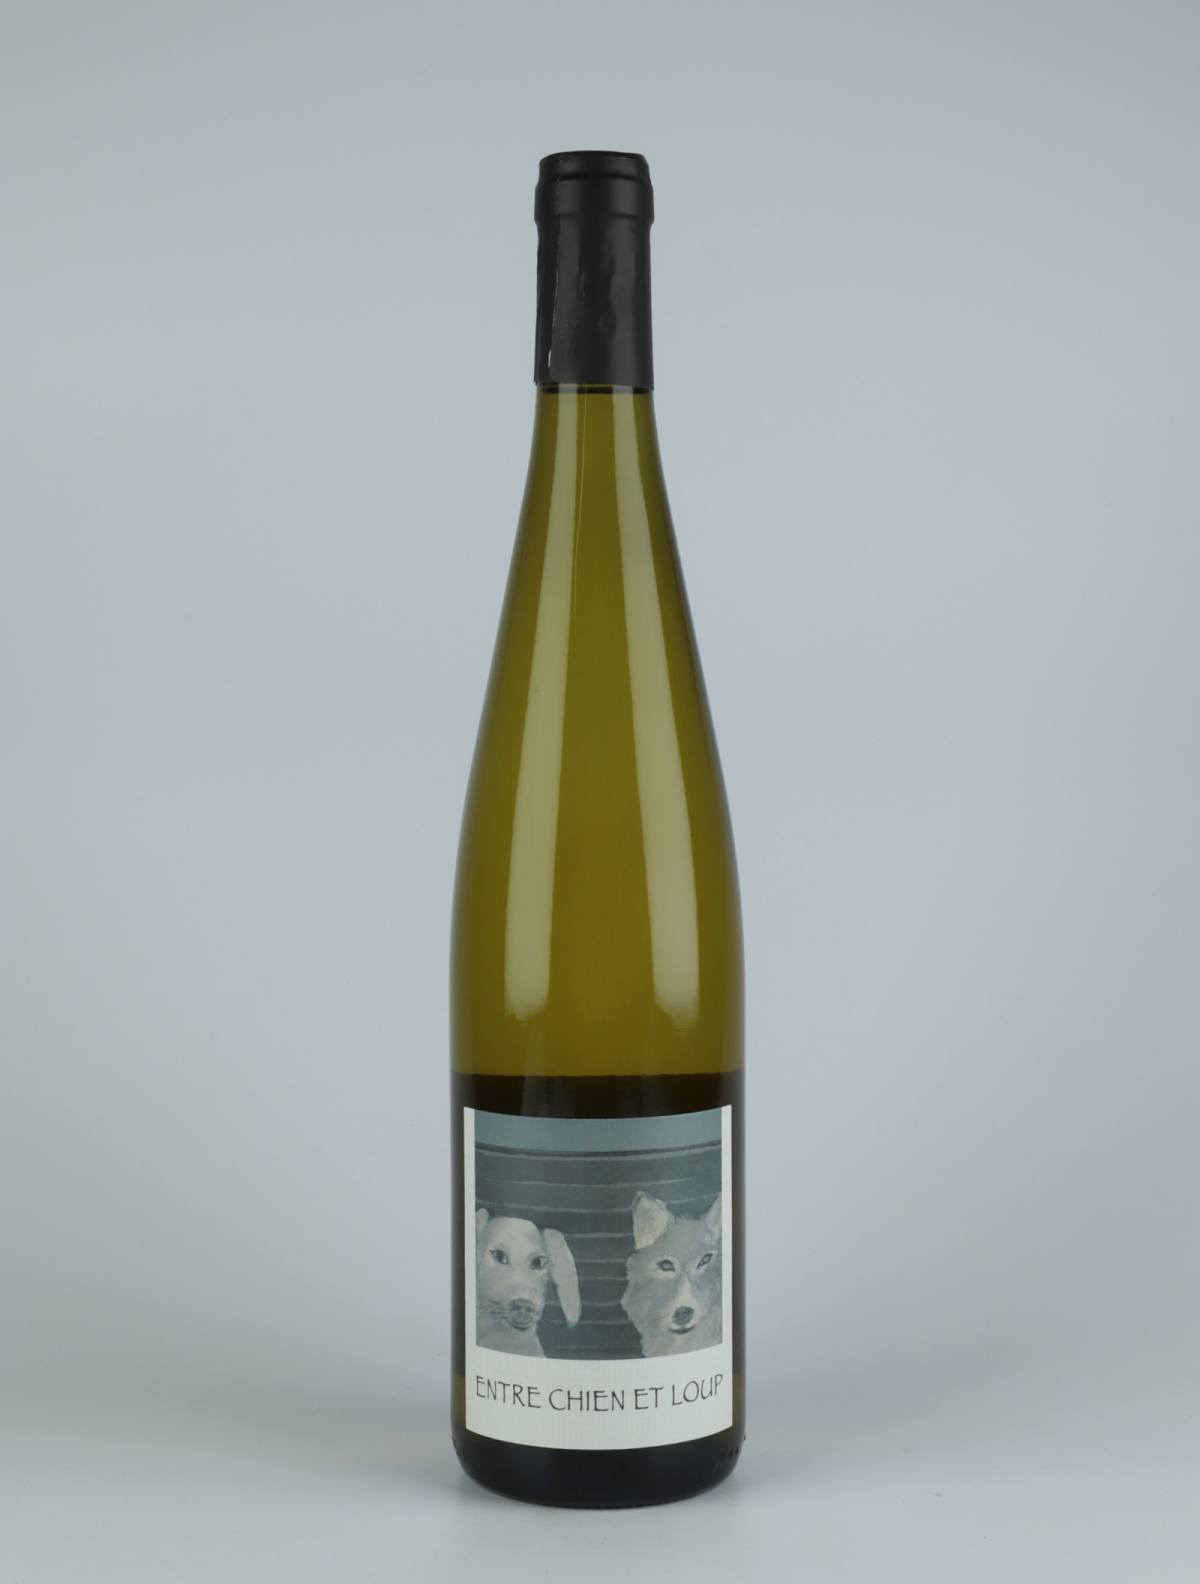 A bottle  Entre Chien et Loup White wine from Domaine Rietsch, Alsace in France